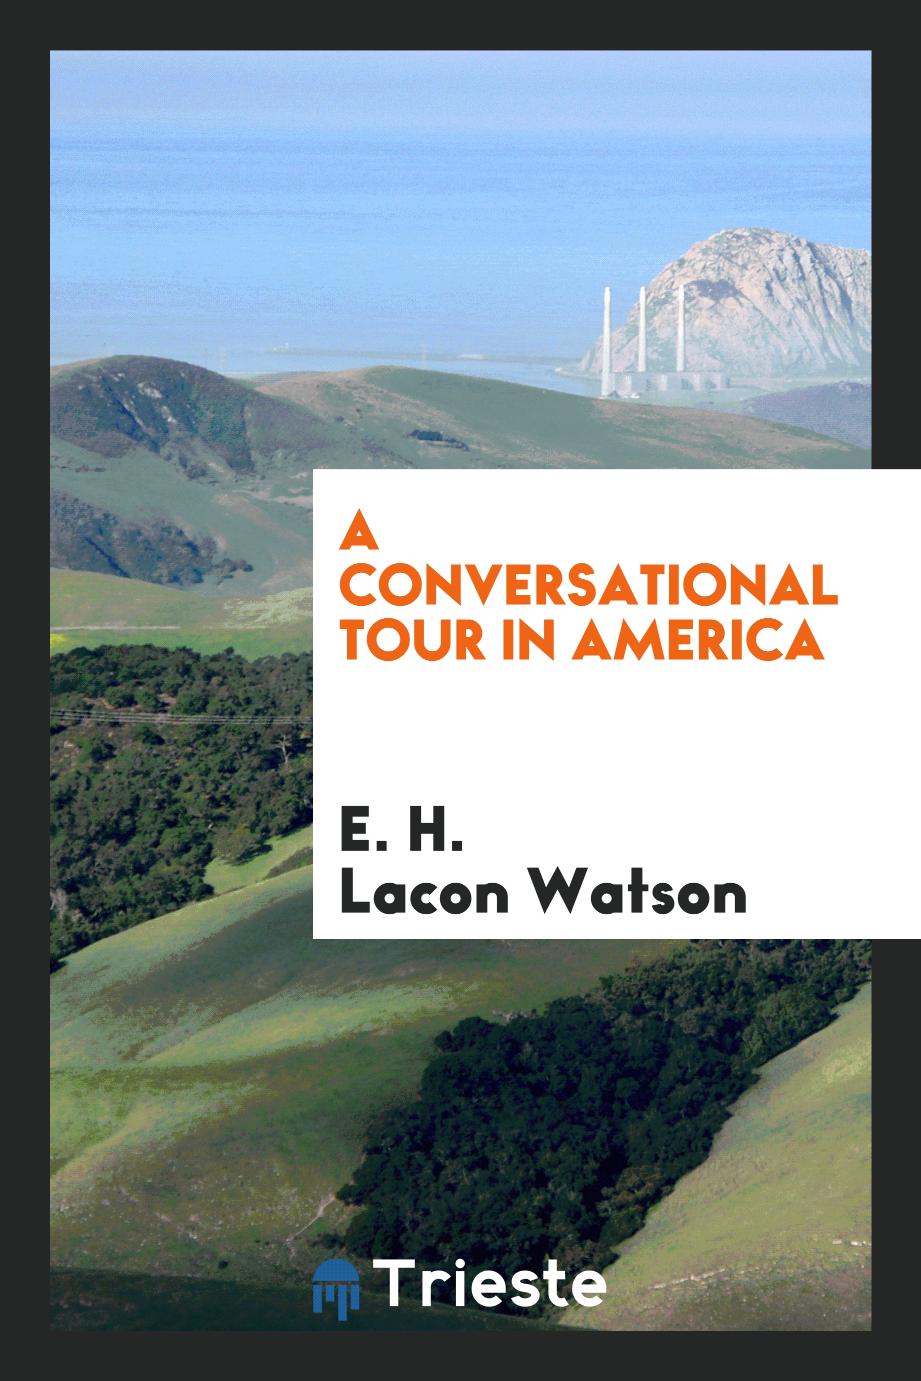 A conversational tour in America